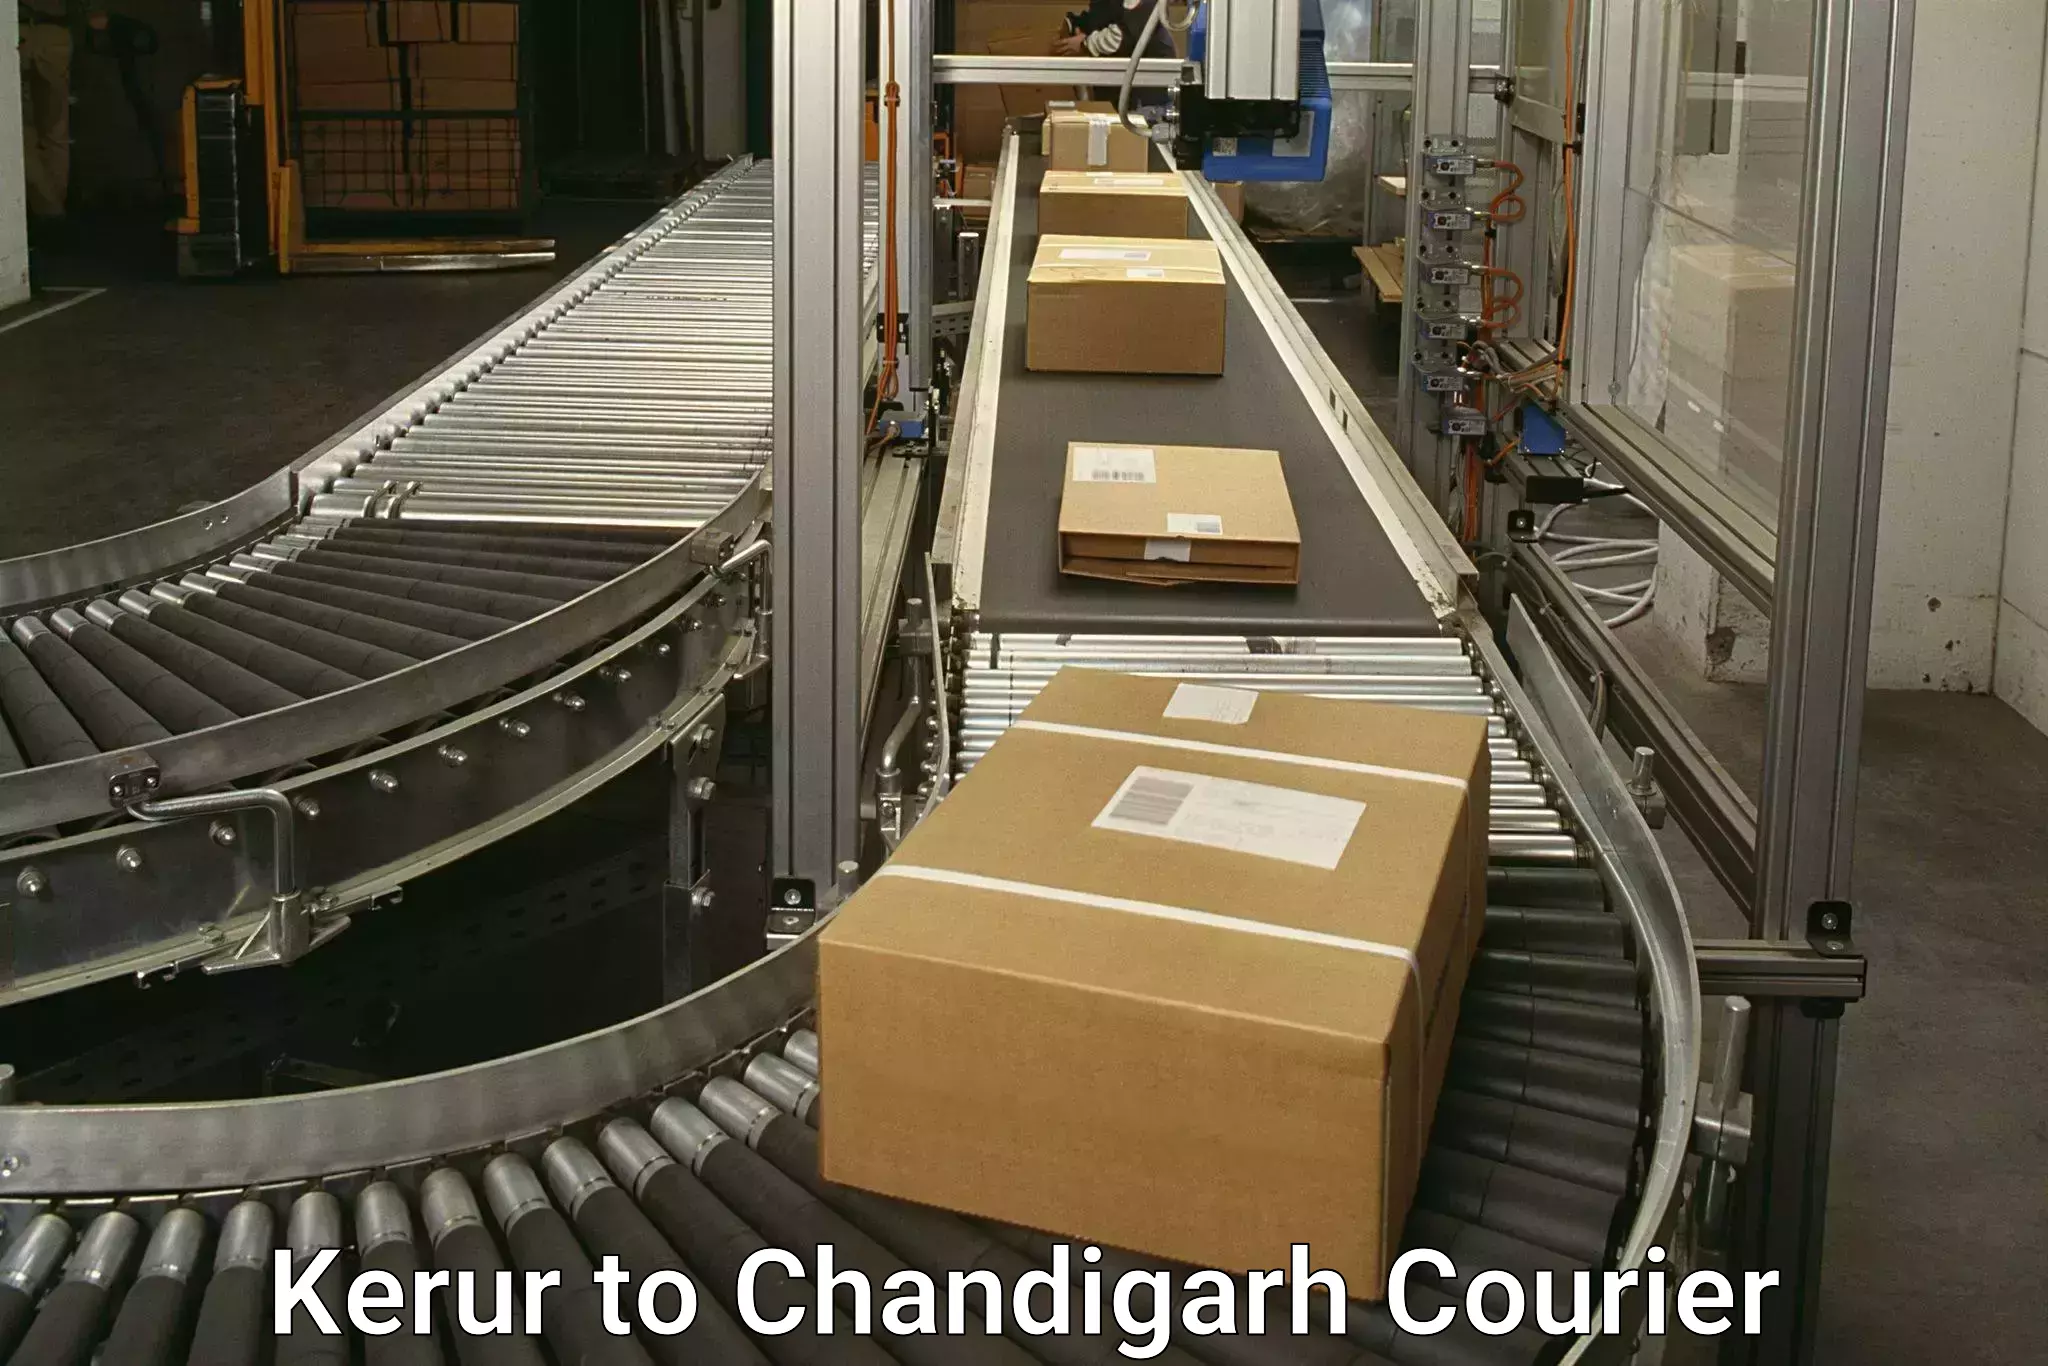 State-of-the-art courier technology Kerur to Chandigarh